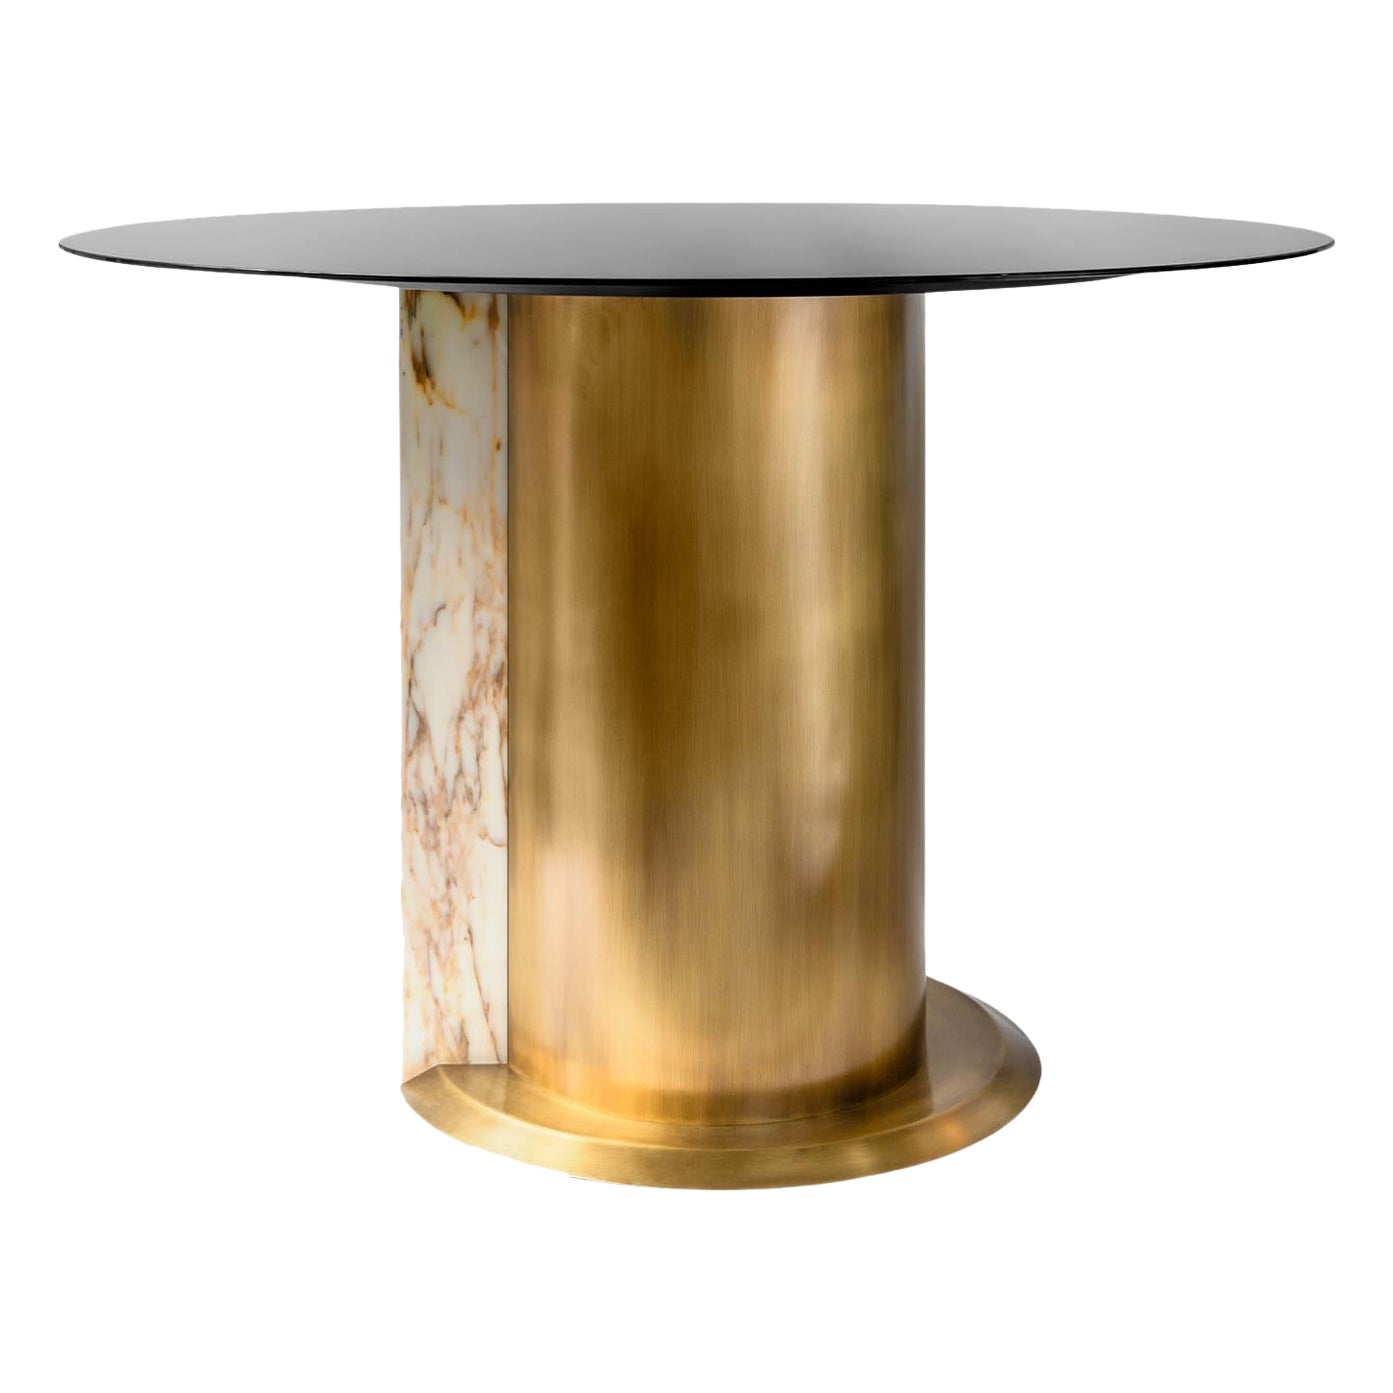 Tim Circular Brass Plated Metal & Marble Dining Table